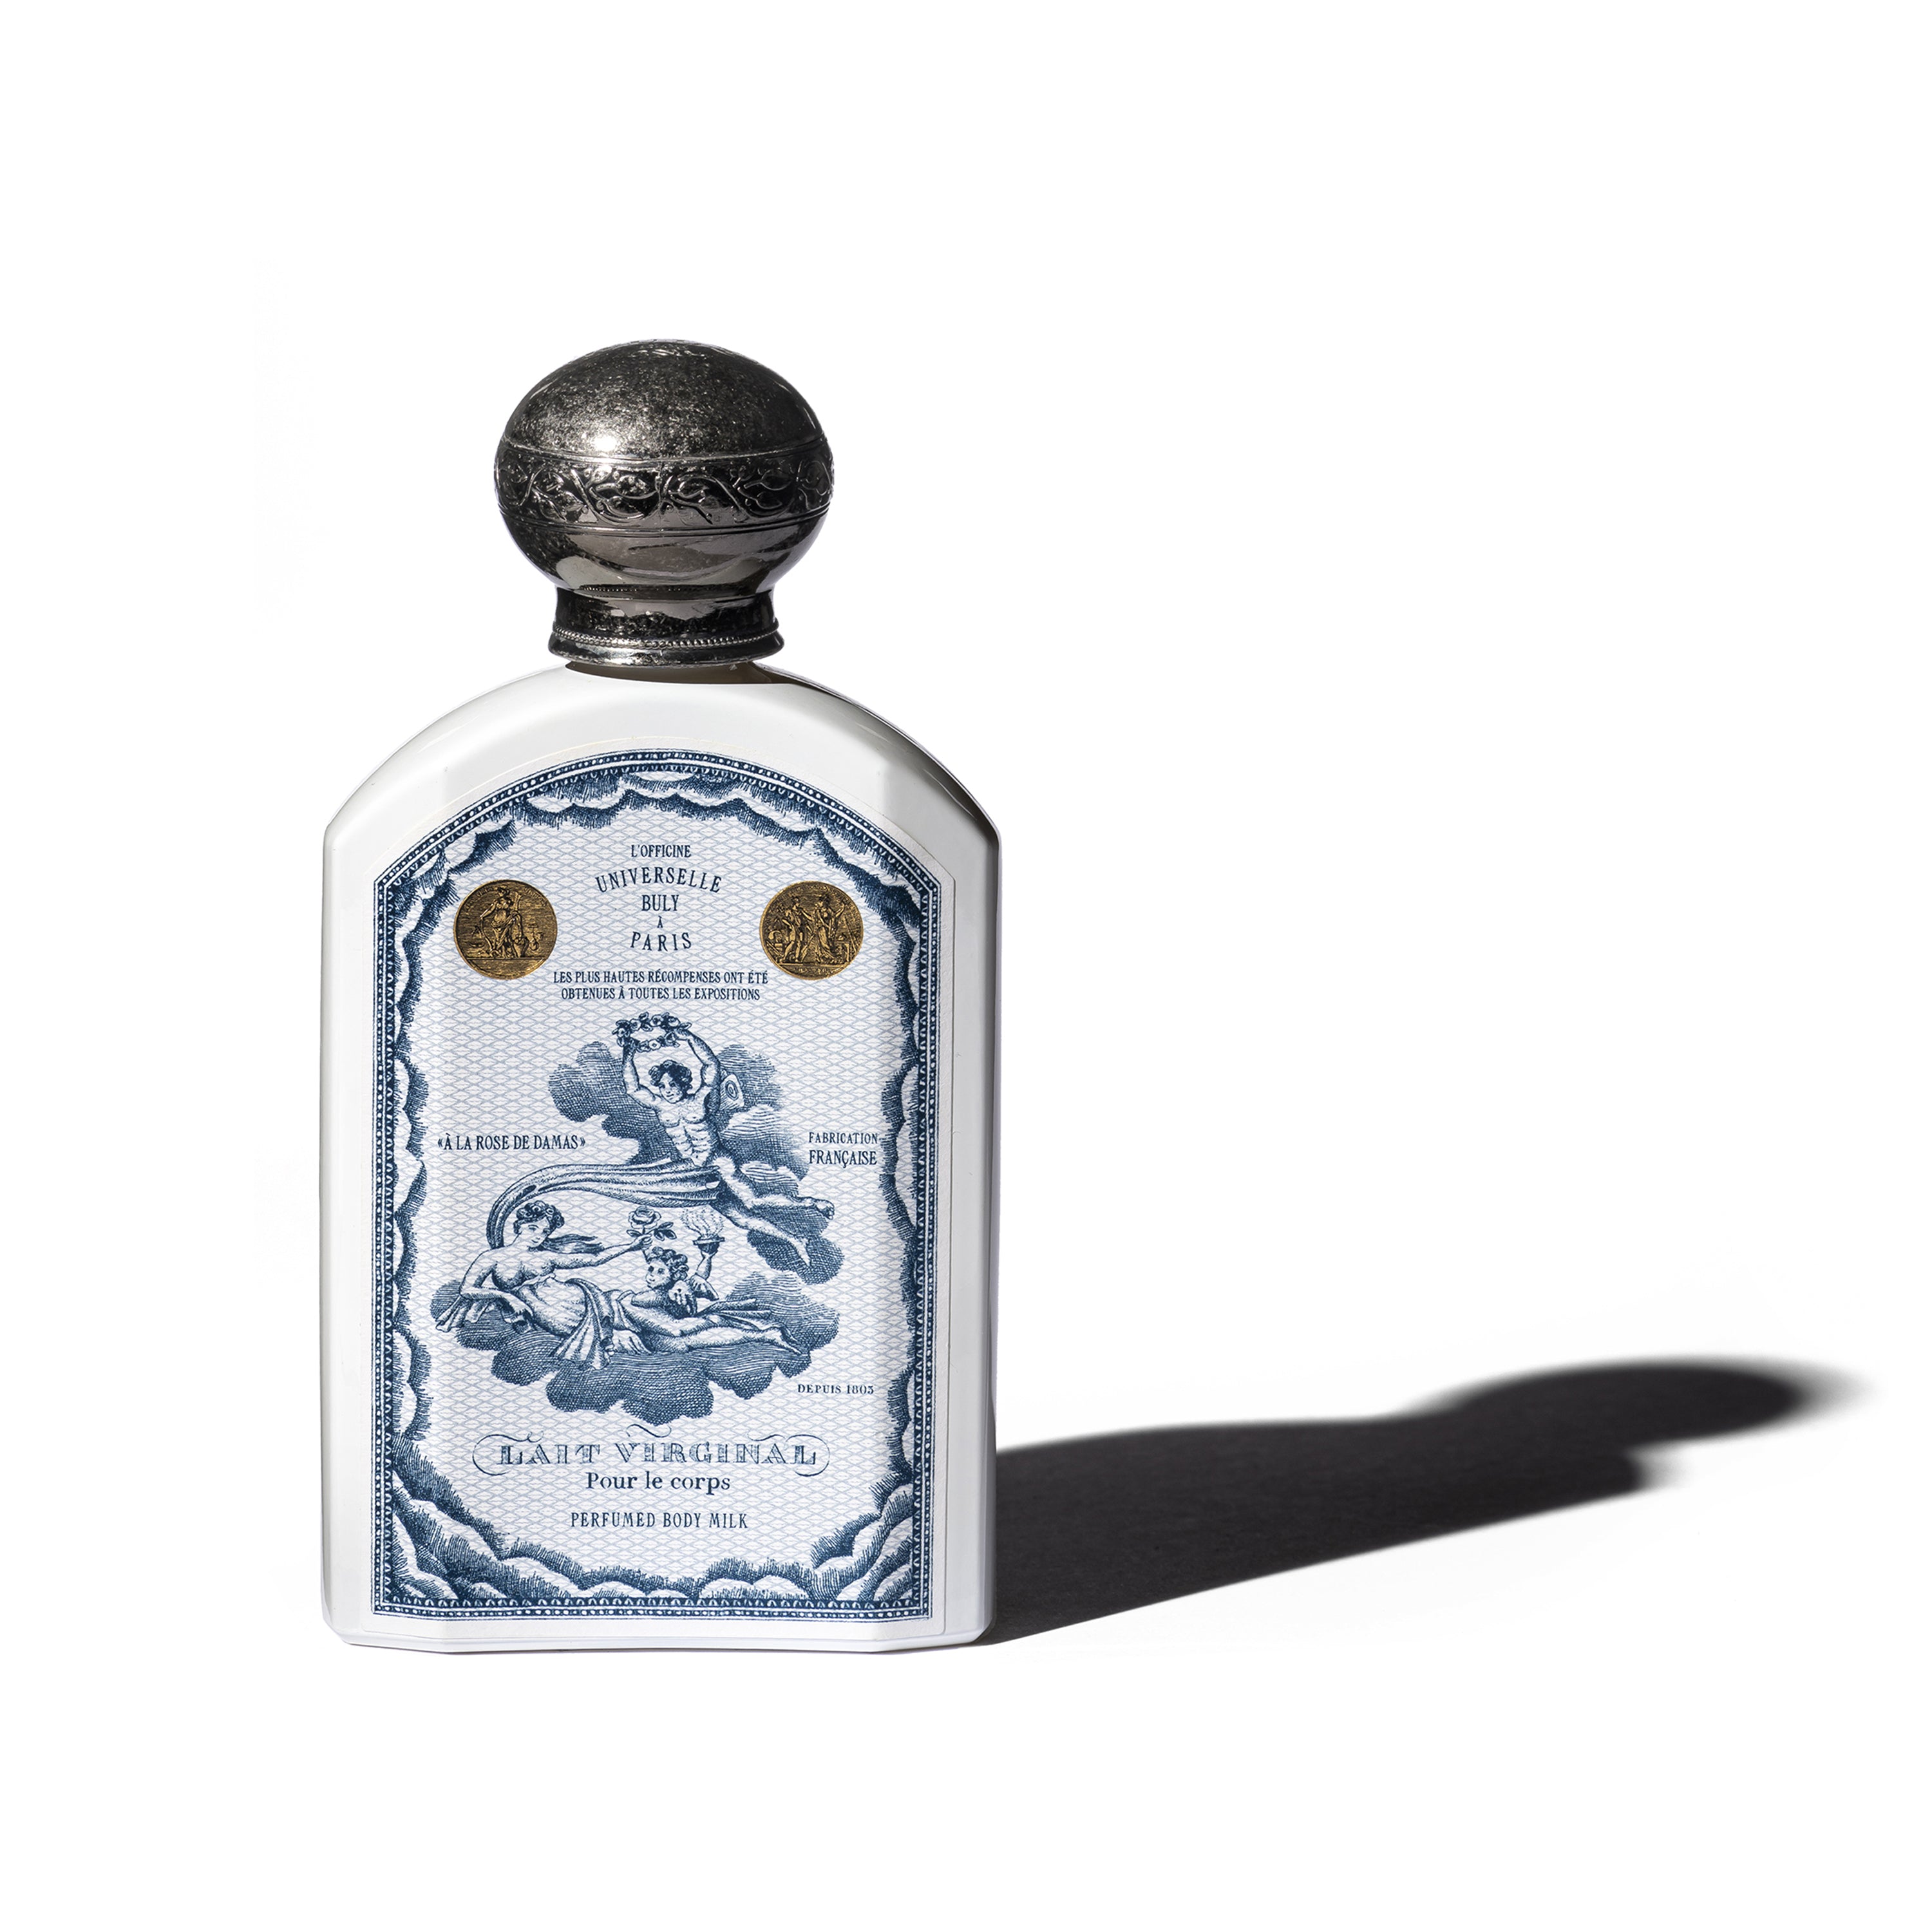 PERFUMING – Officine Universelle Buly